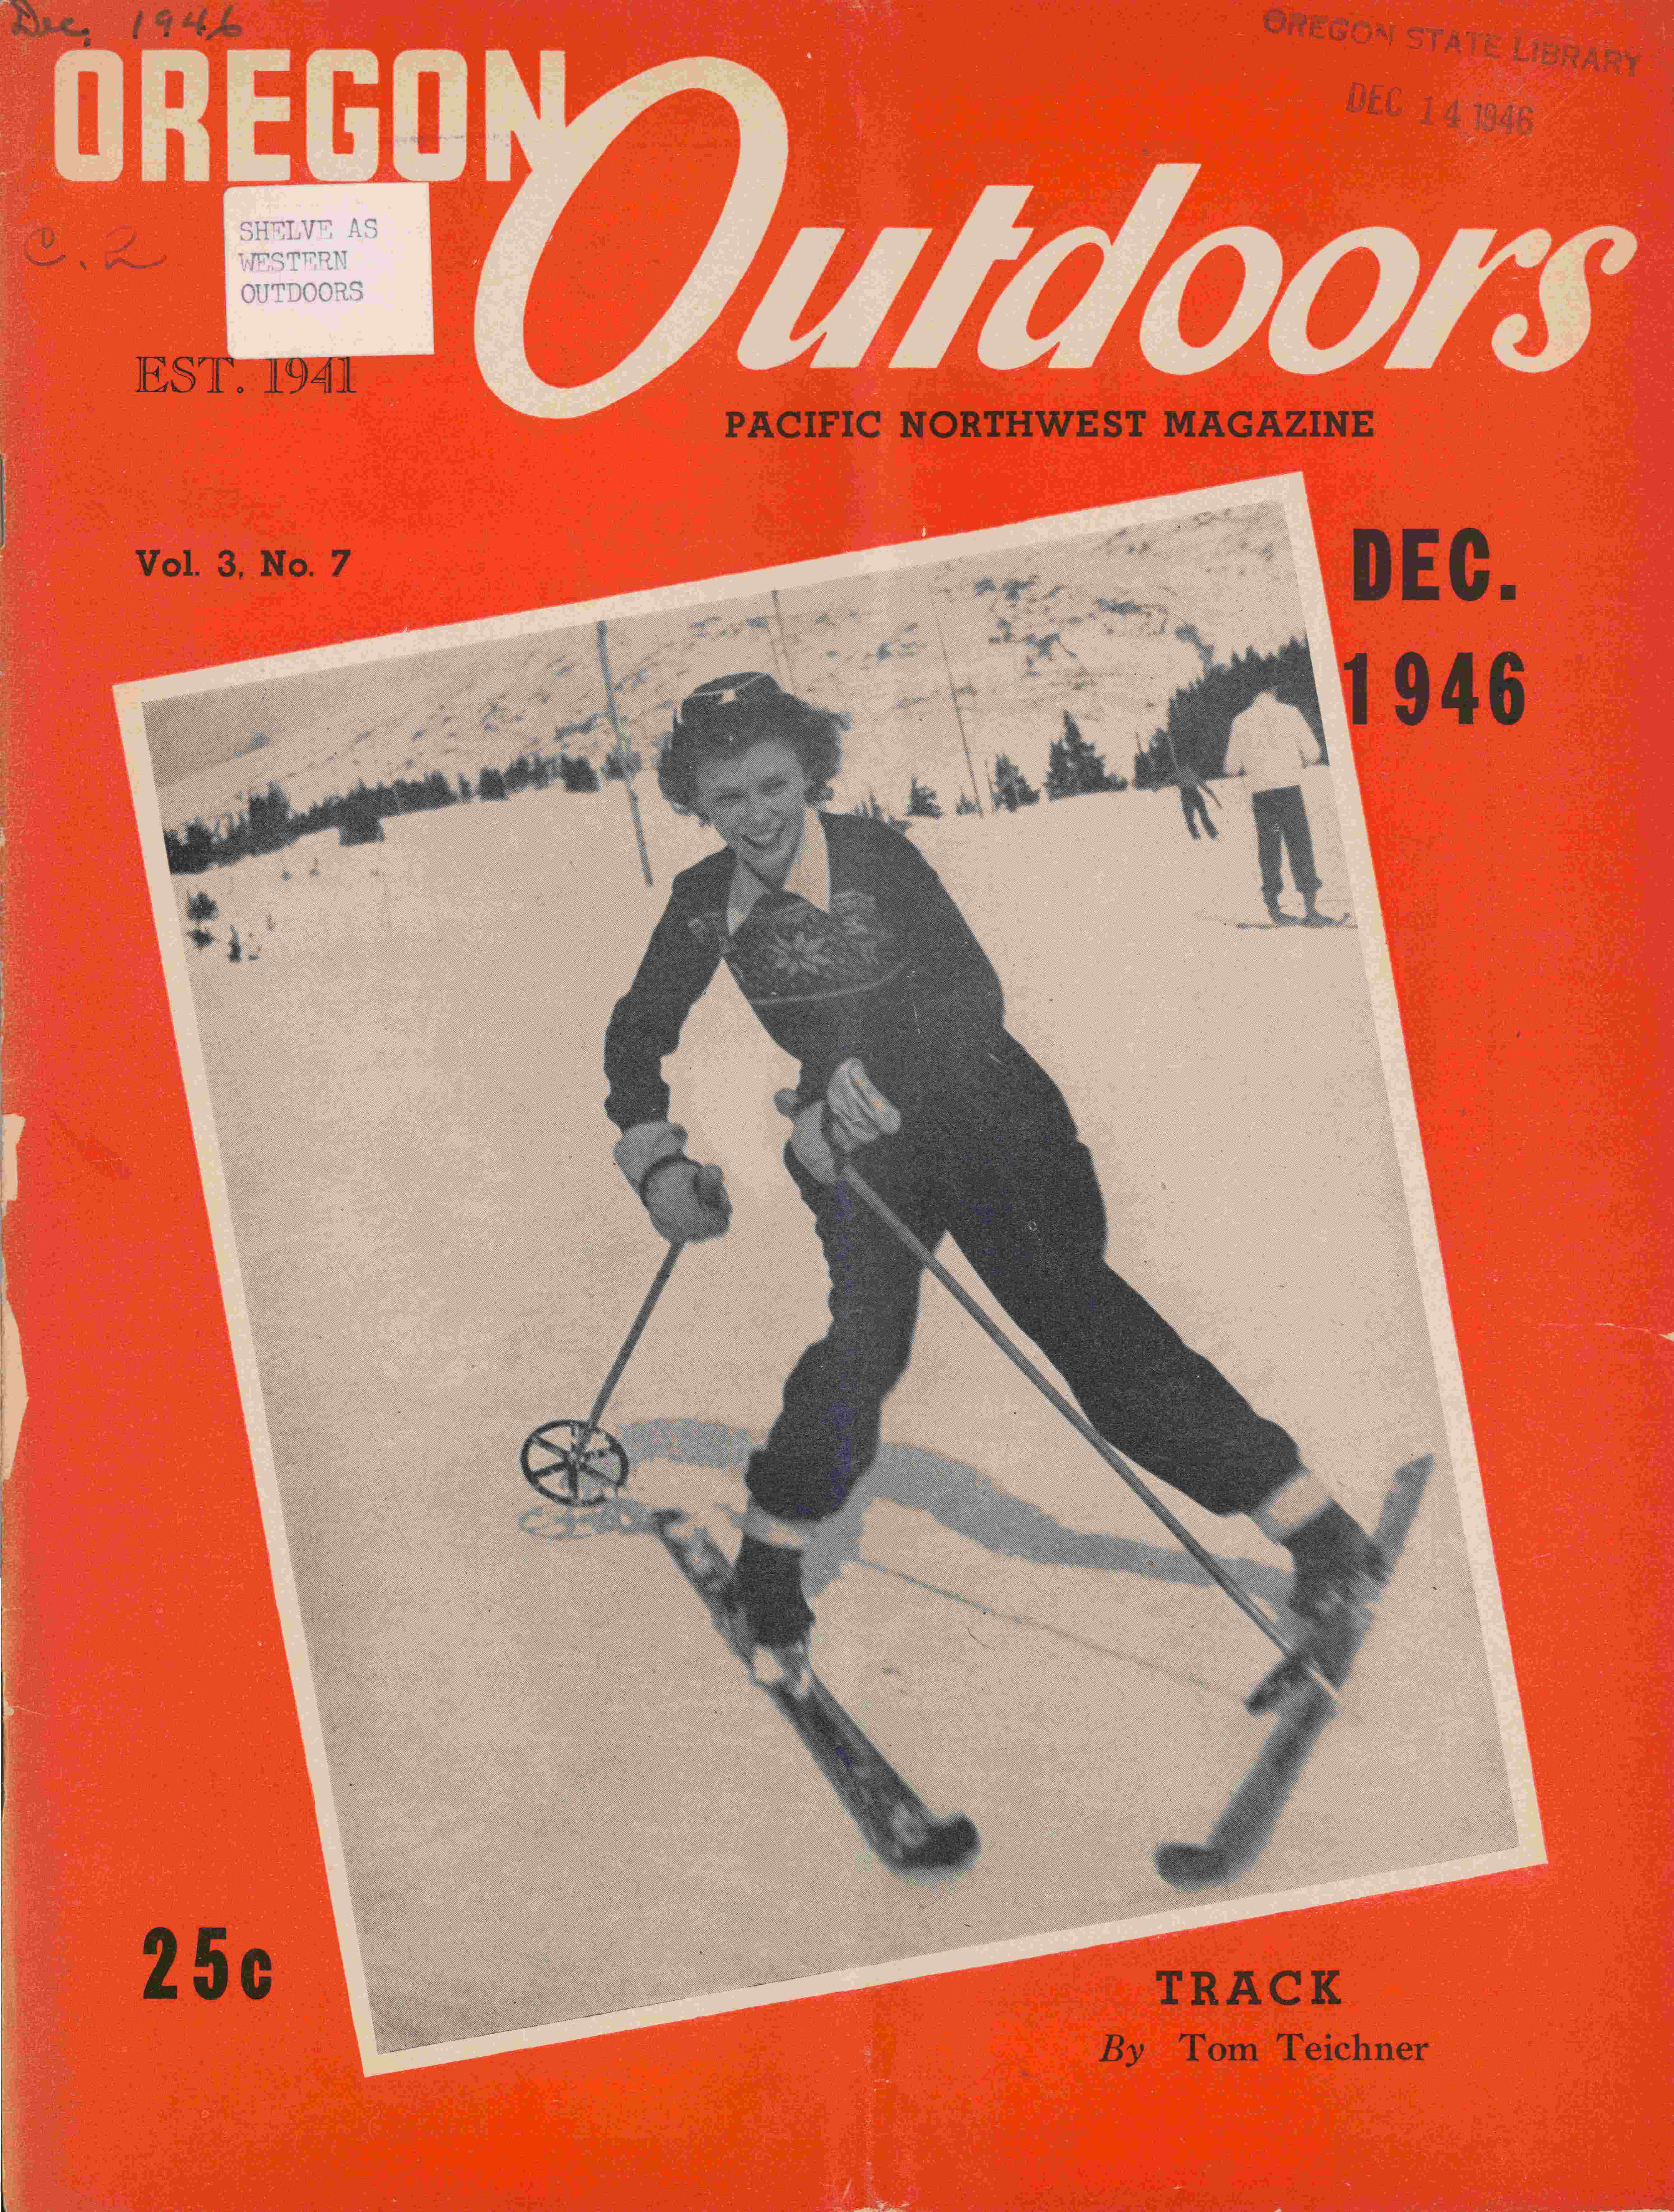 Cover of Oregon Outdoors magazine from Dec. 1946